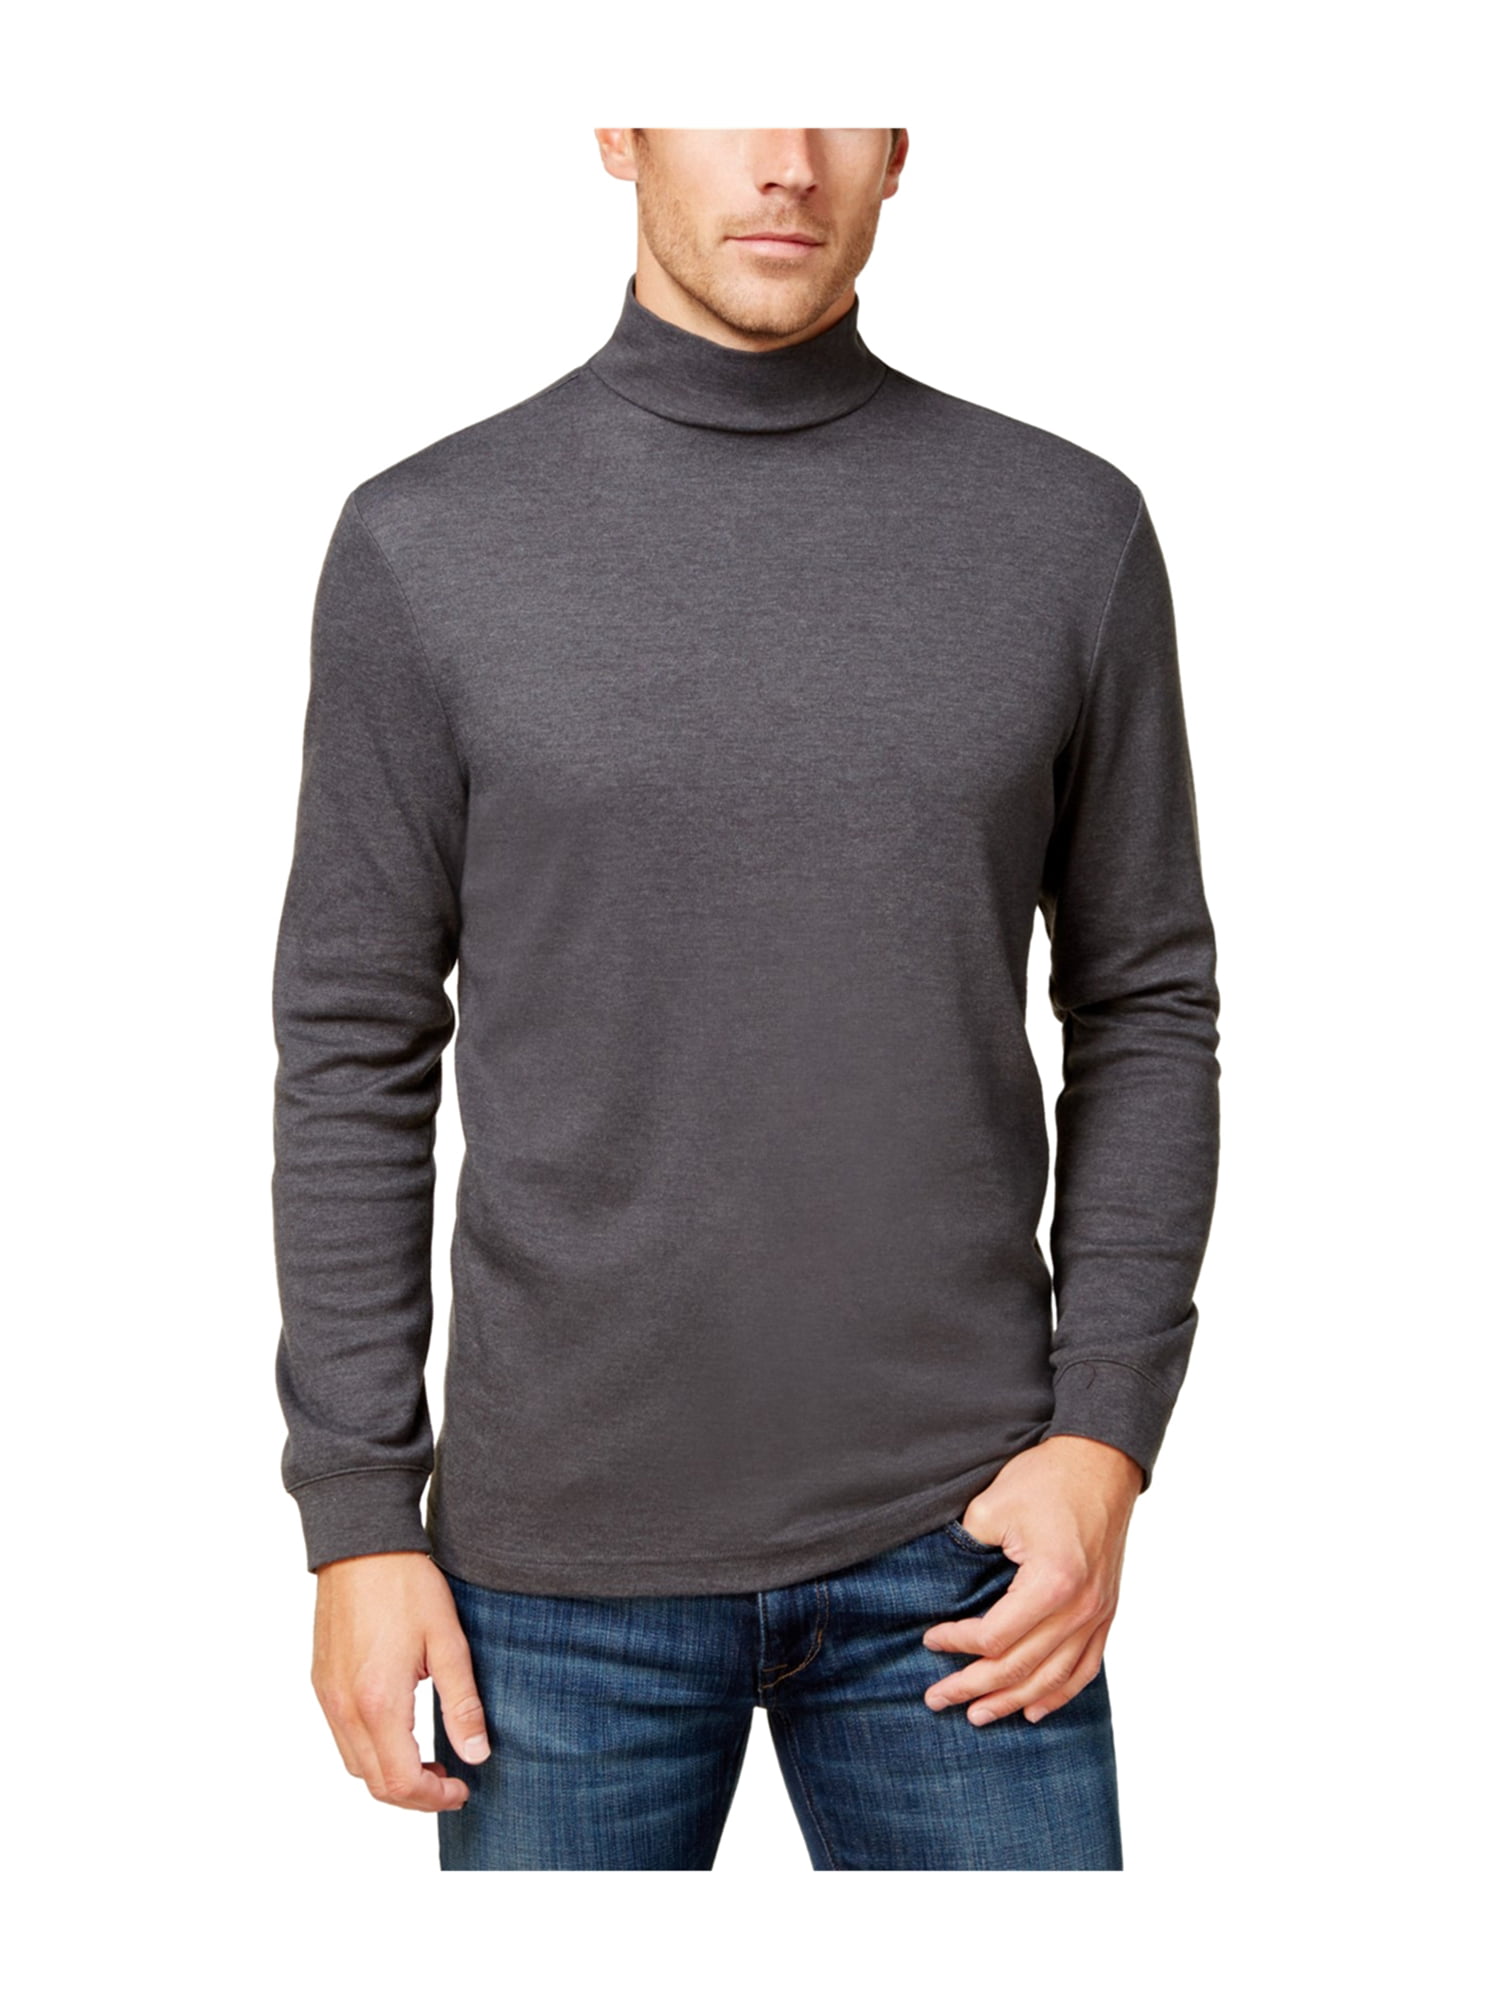 Adult Mock turtleneck Long Sleeve T-shirt.100% cotton.Size S to 3XL ...